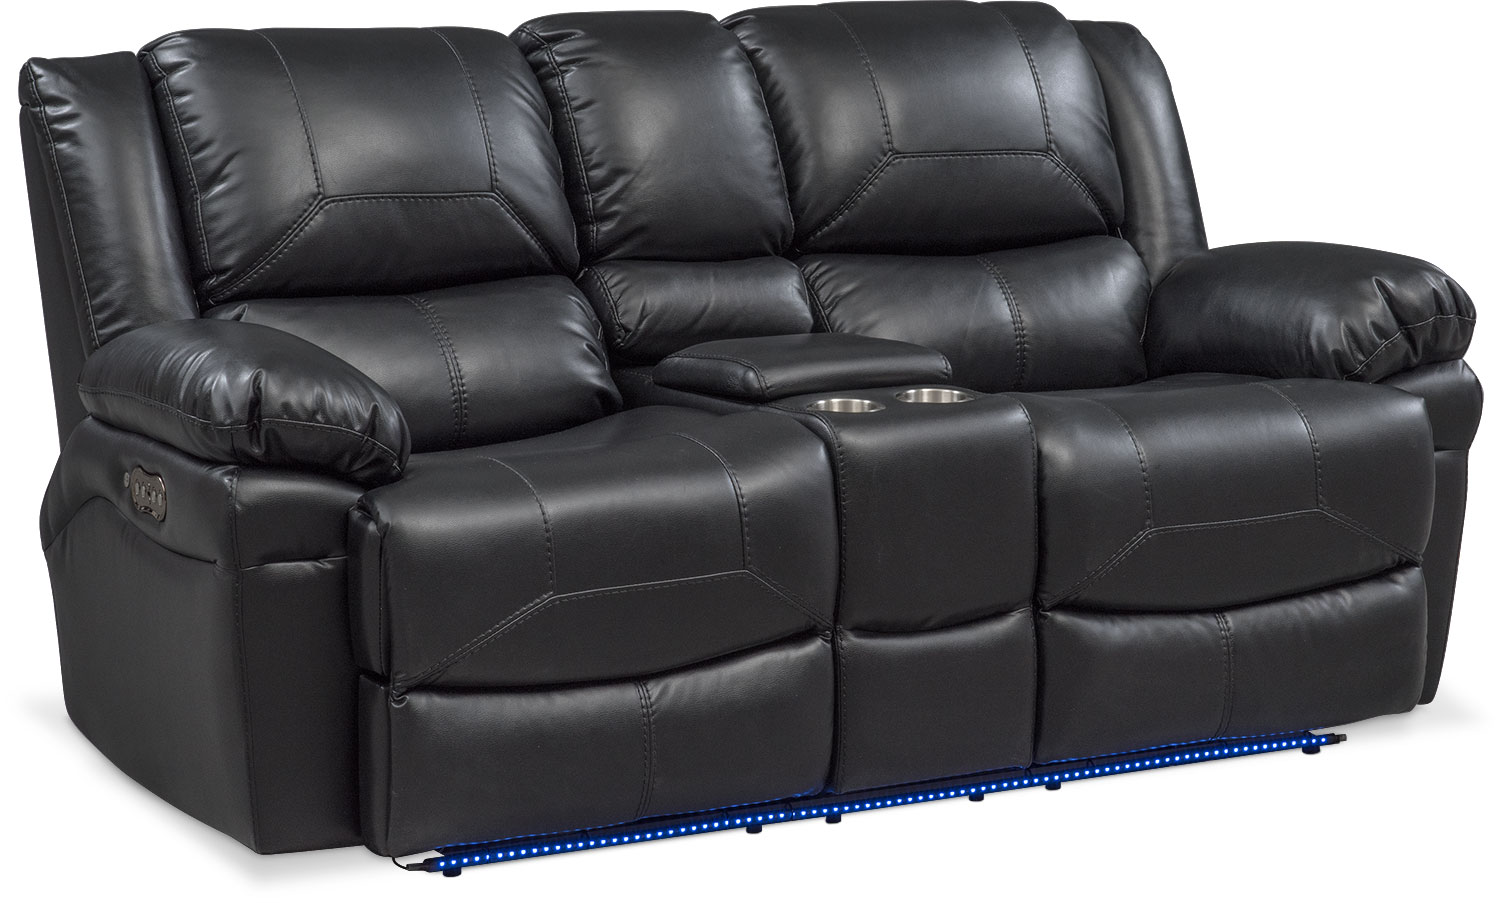 power loveseat living room furniture - monza dual power reclining loveseat with console - DVECUTL